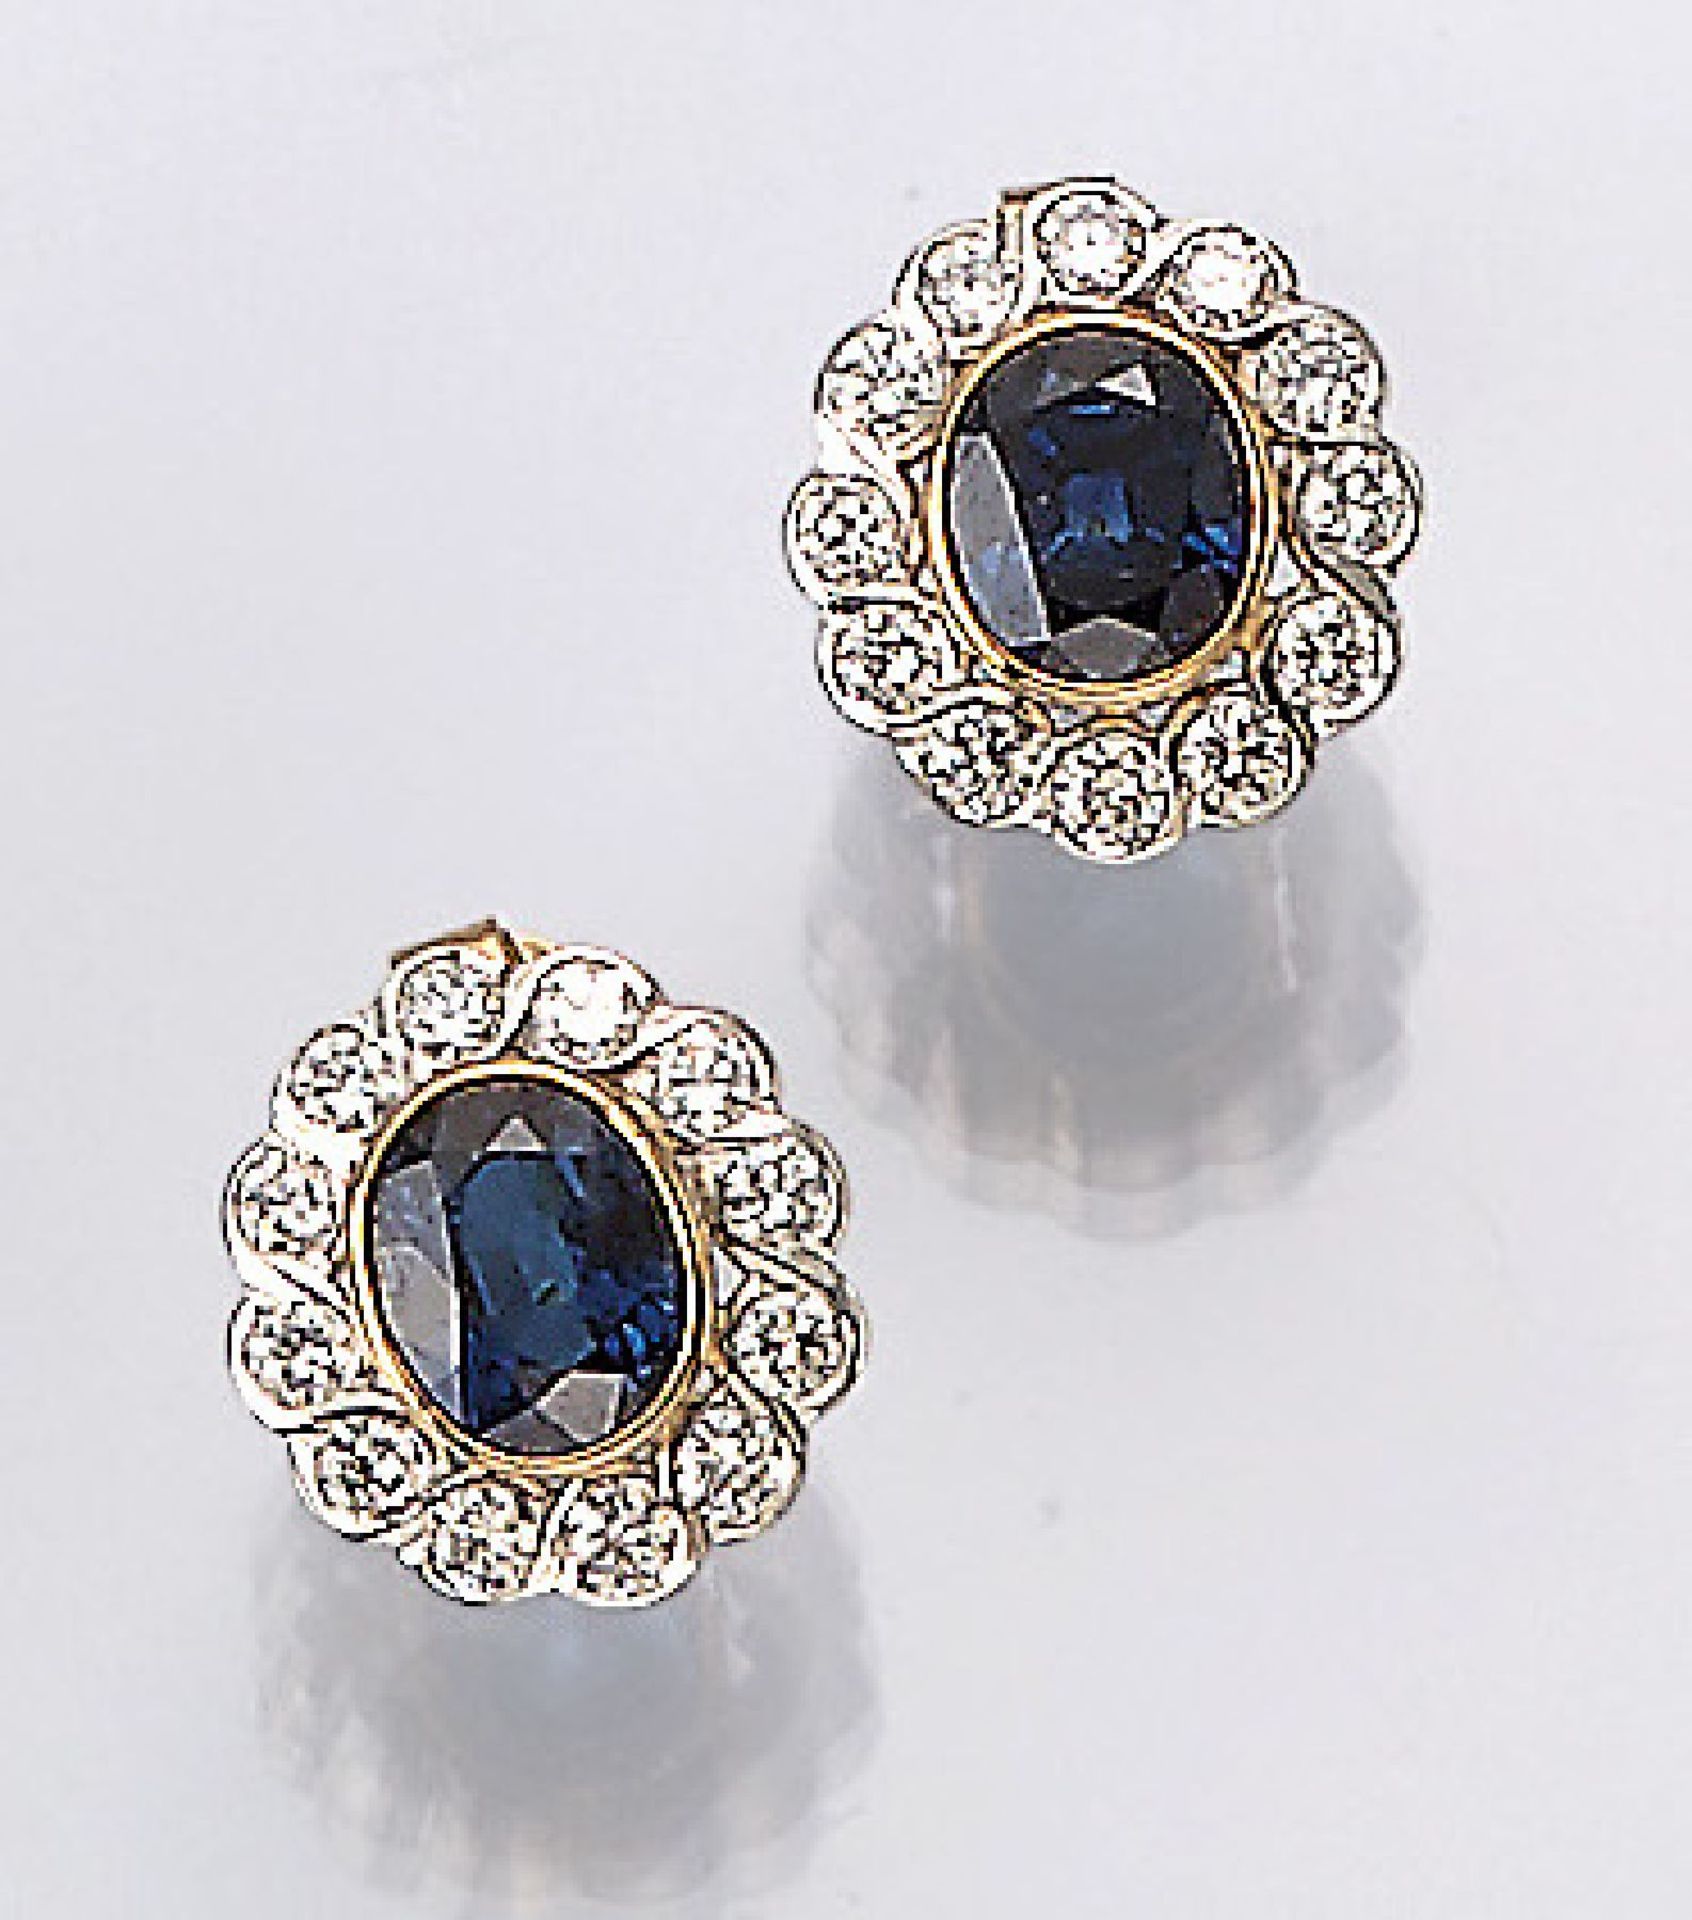 Pair of 18 kt gold earrings with sapphires andbrilliants , YG/WG 750/000, 2 sapphires approx. 1.5